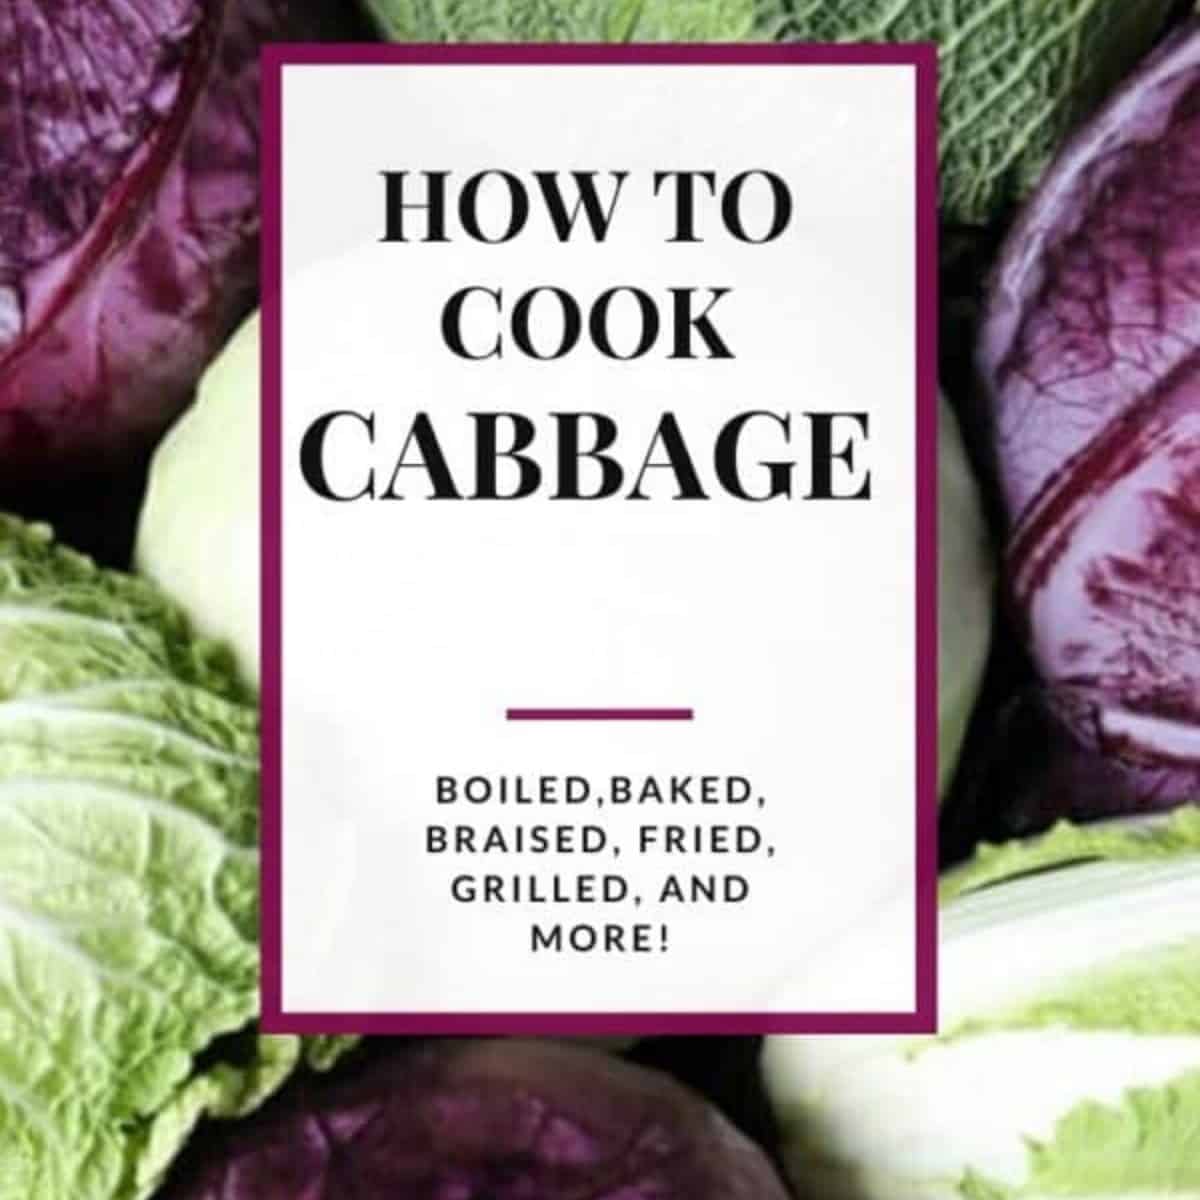 How To Cook Cabbage 20 Delectable Cabbage Recipes Twosleevers,Creamsicle Shot